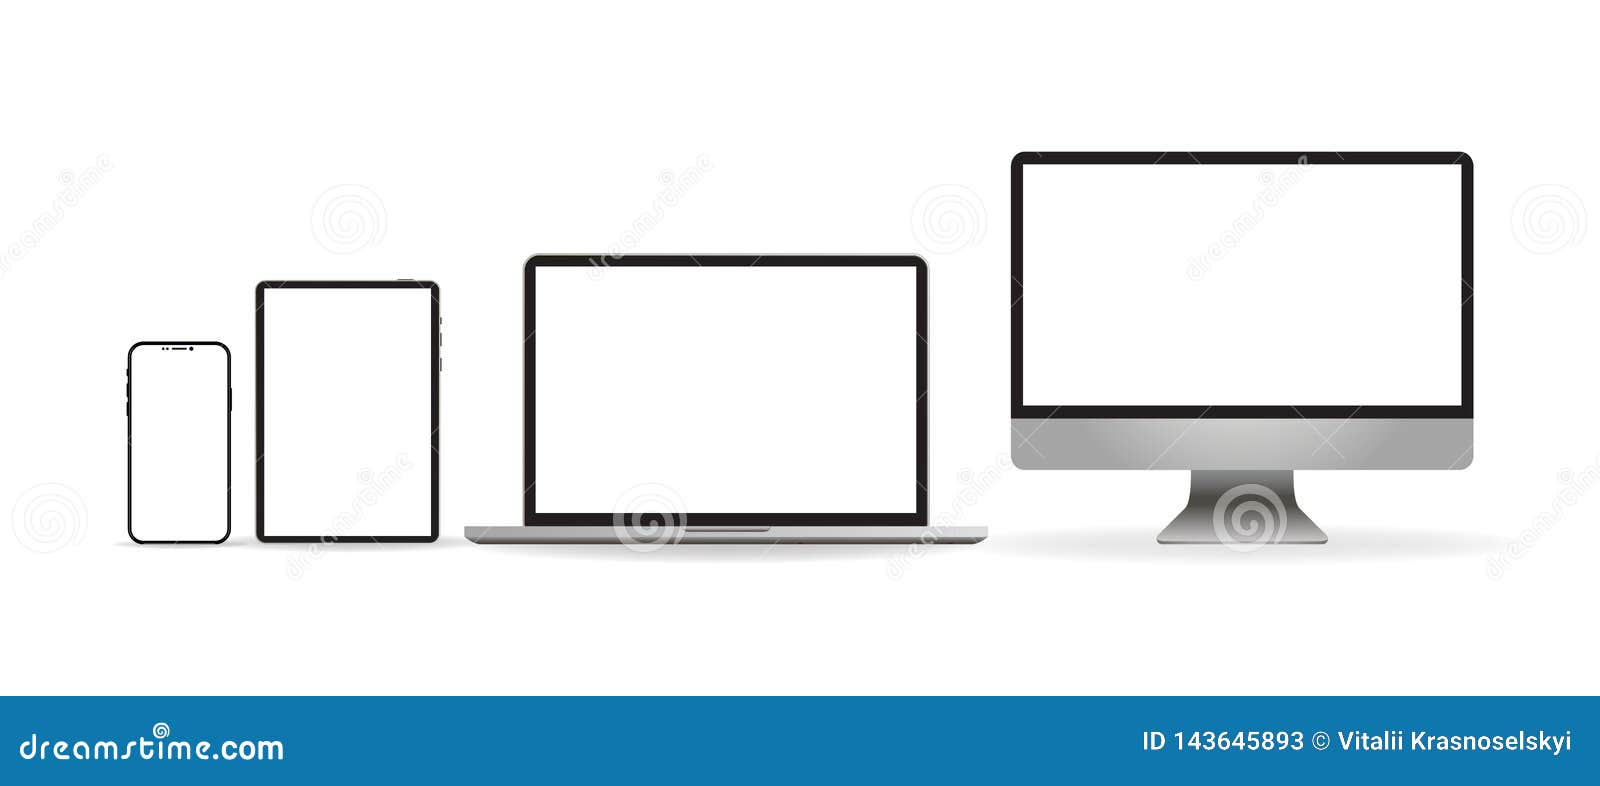 laptop realistic. device in mockup style. set realistic  devices on a white background. 